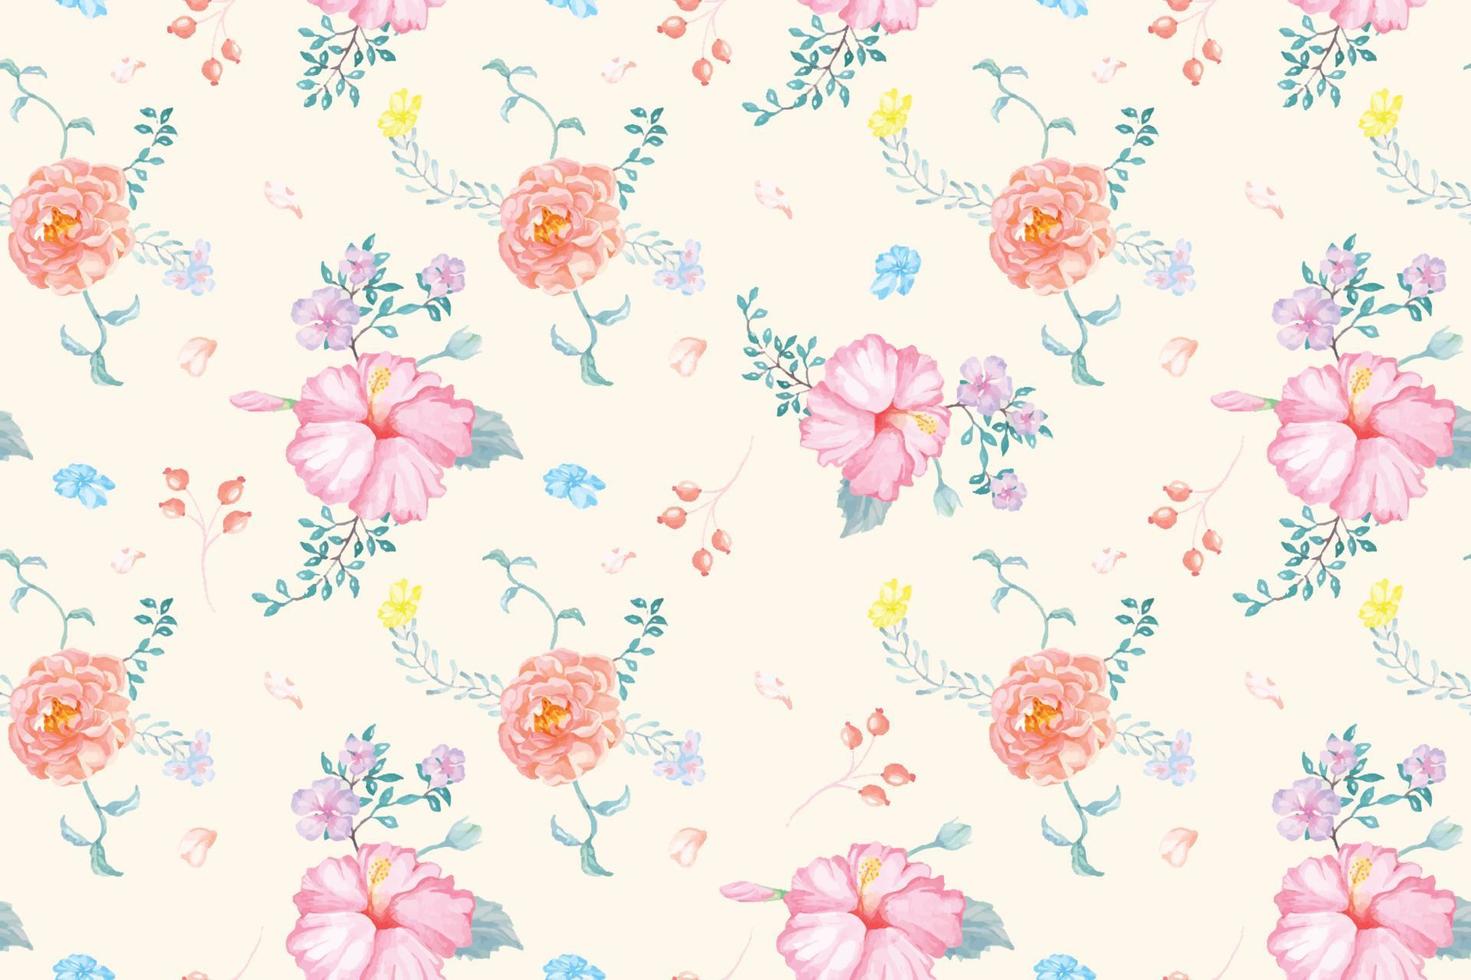 Rose seamless pattern with watercolor.Designed for fabric and wallpaper, vintage style.Hand drawn floral pattern illustration.Blooming flower painting for summer.Botany background. vector